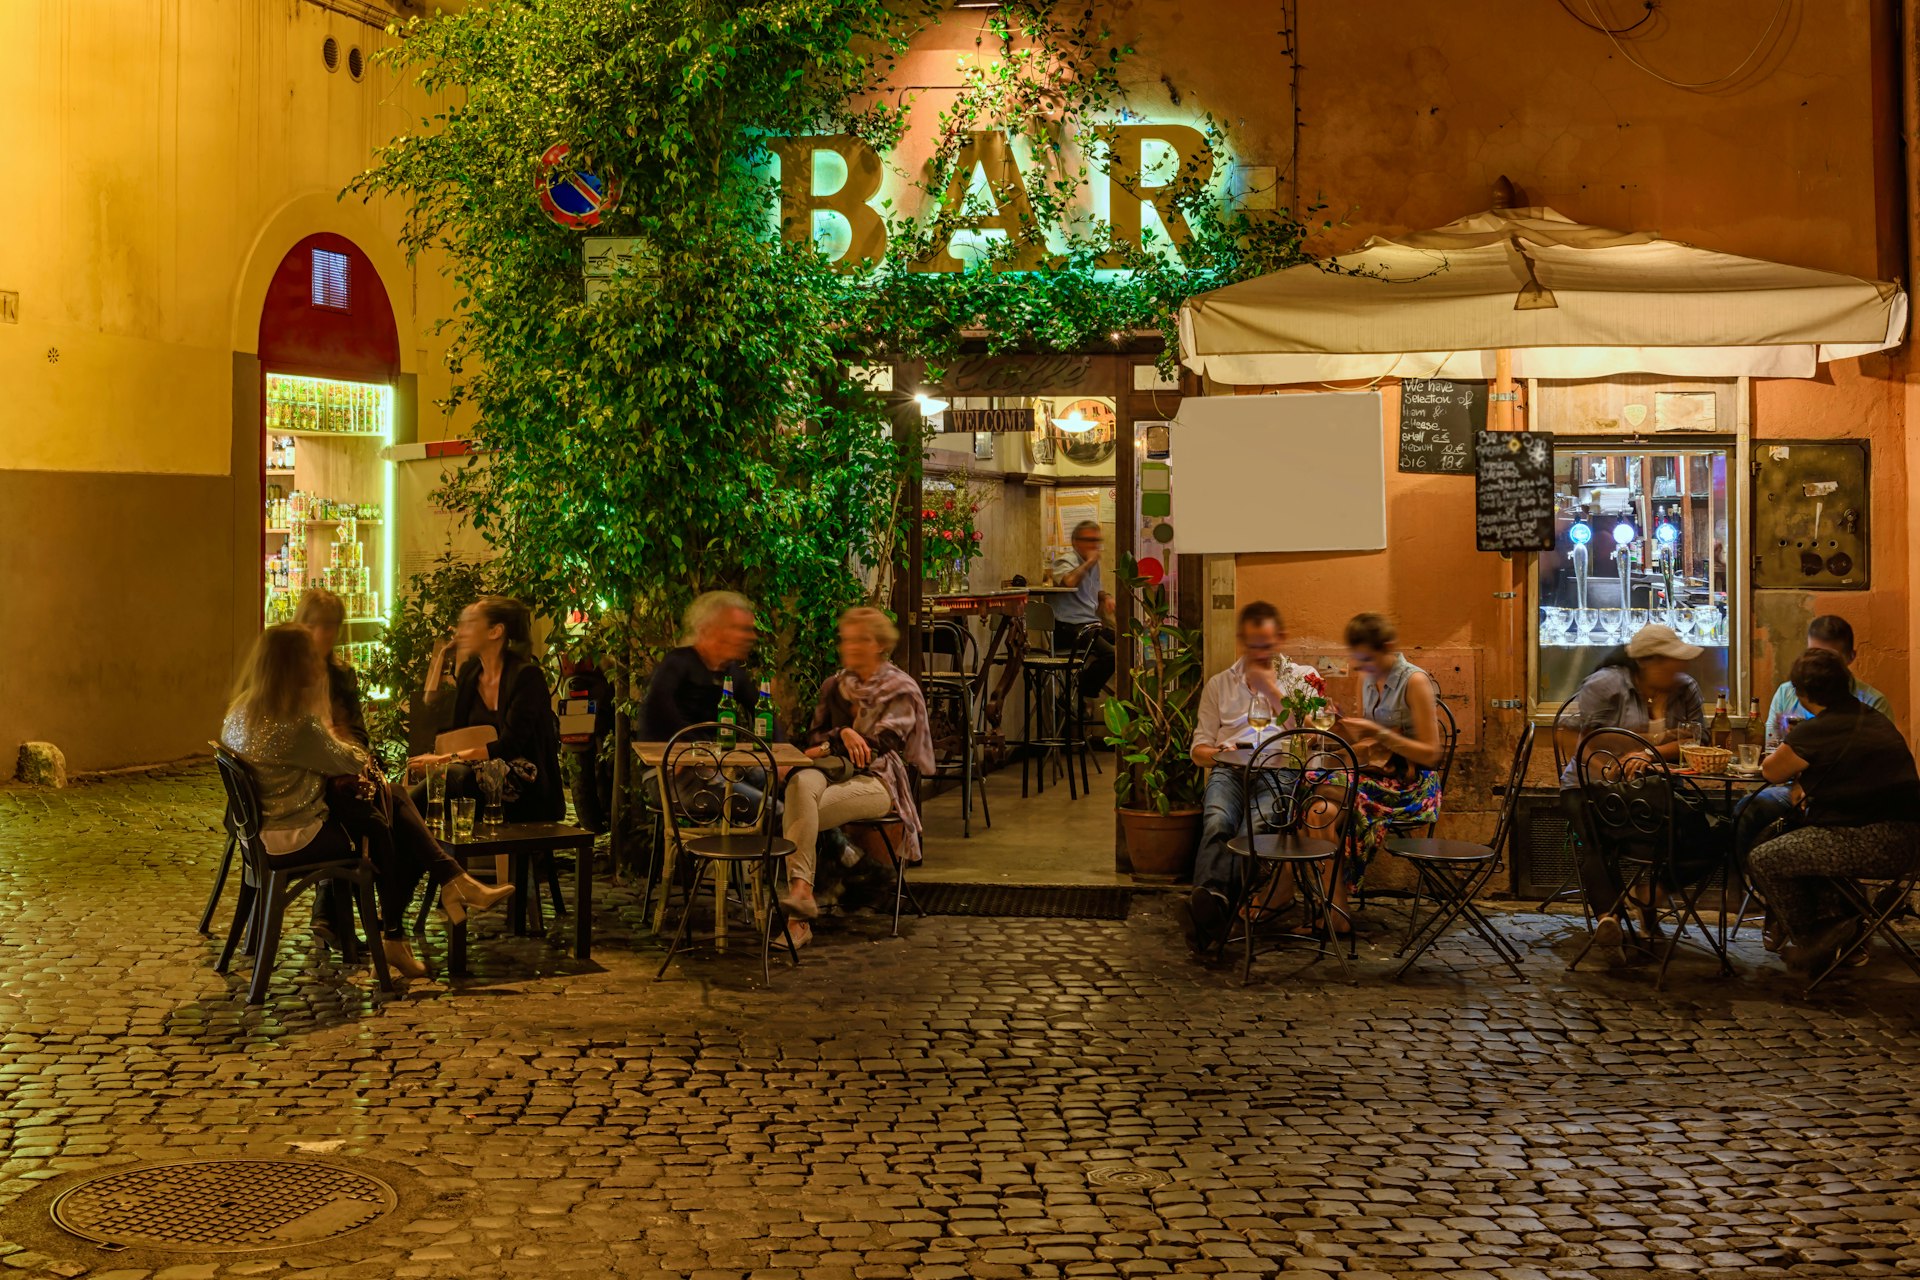 People sit outside a bar on an old street at night in Trastevere, Rome